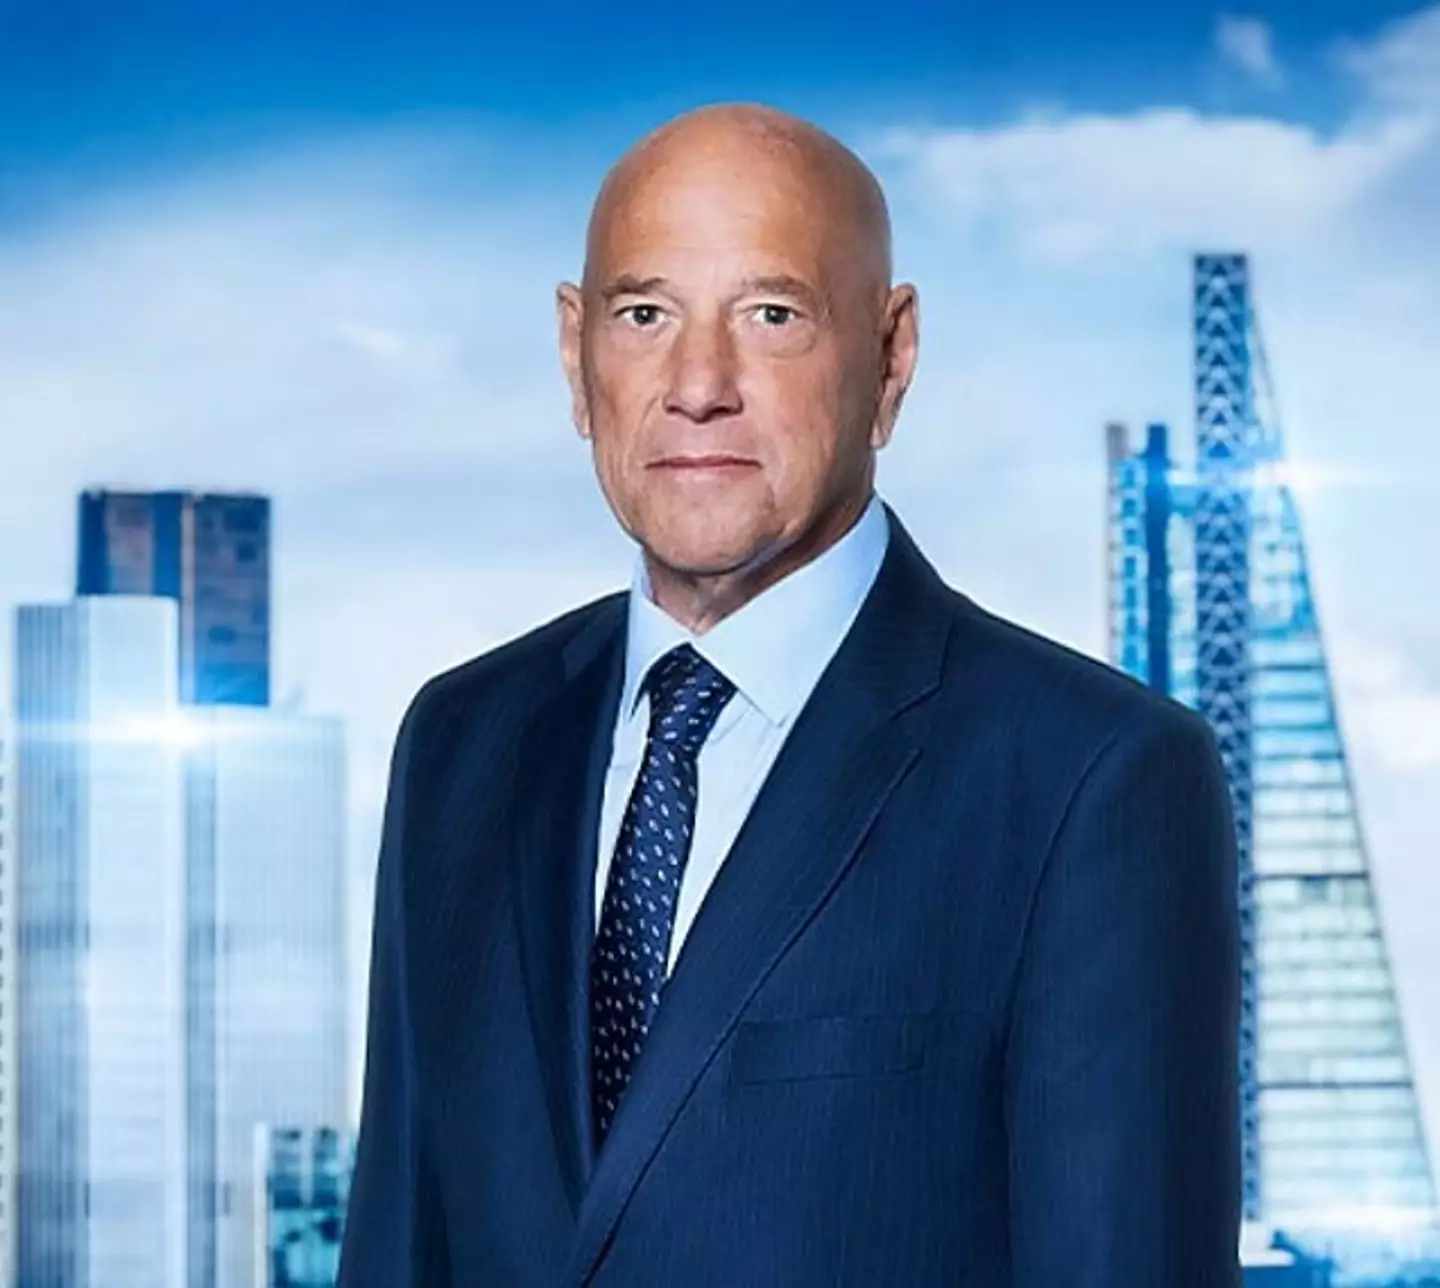 Claude Littner won't be following the candidates for the rest of this series of The Apprentice.